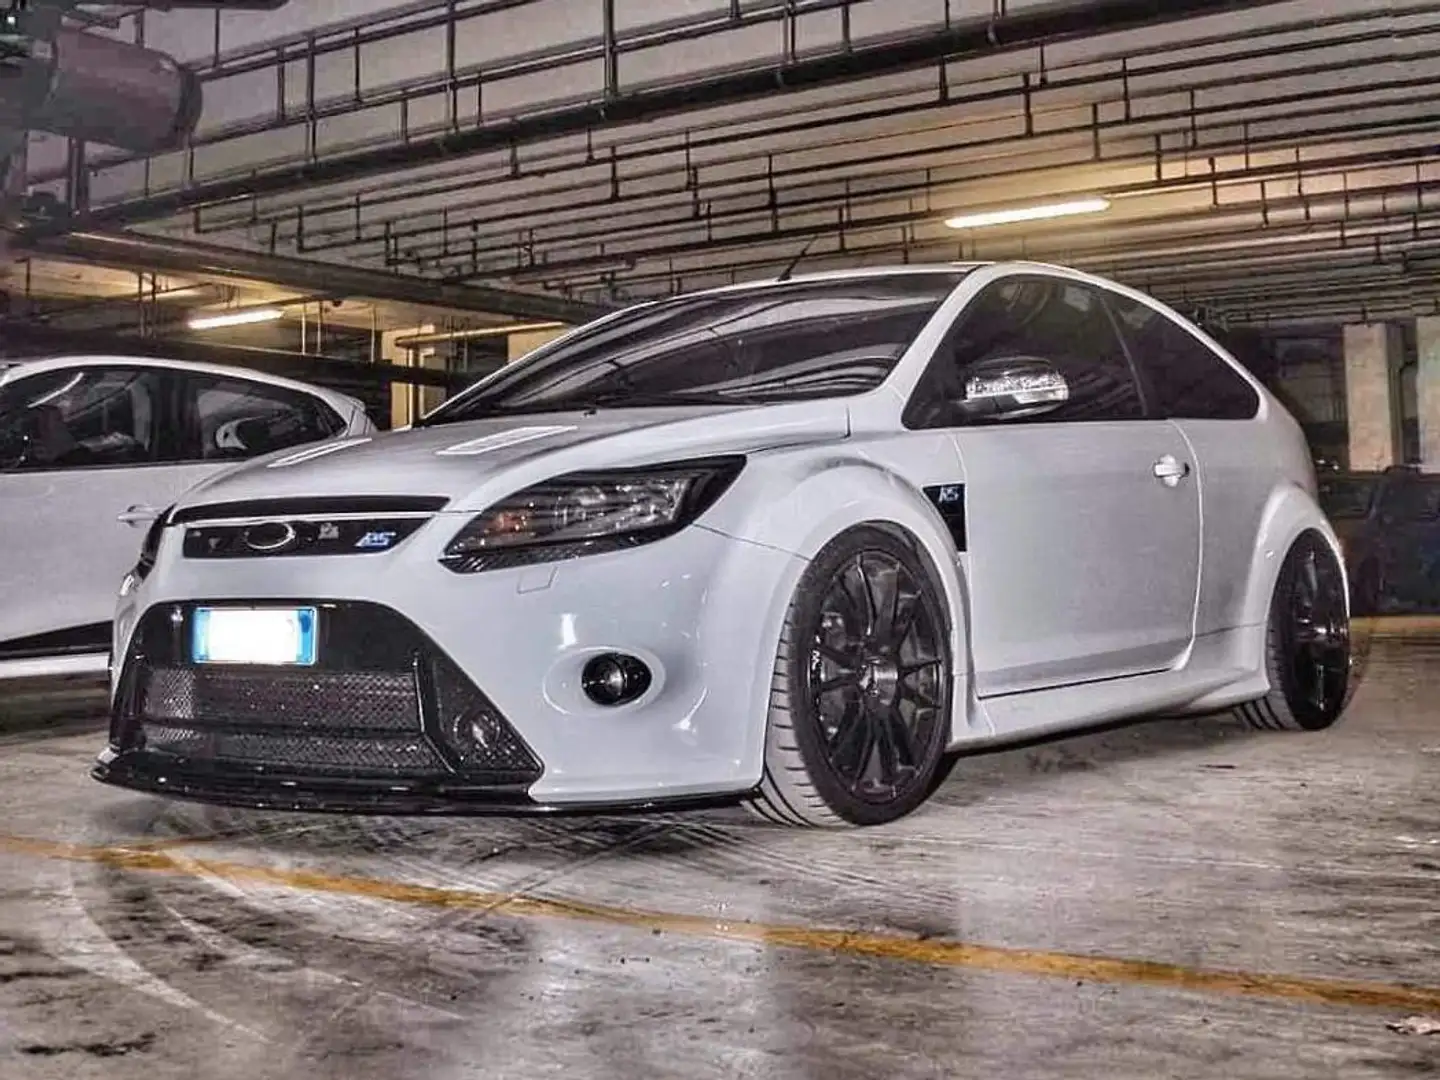 Ford Focus Focus 3p 2.5t RS White edition (rs) 305cv - 1